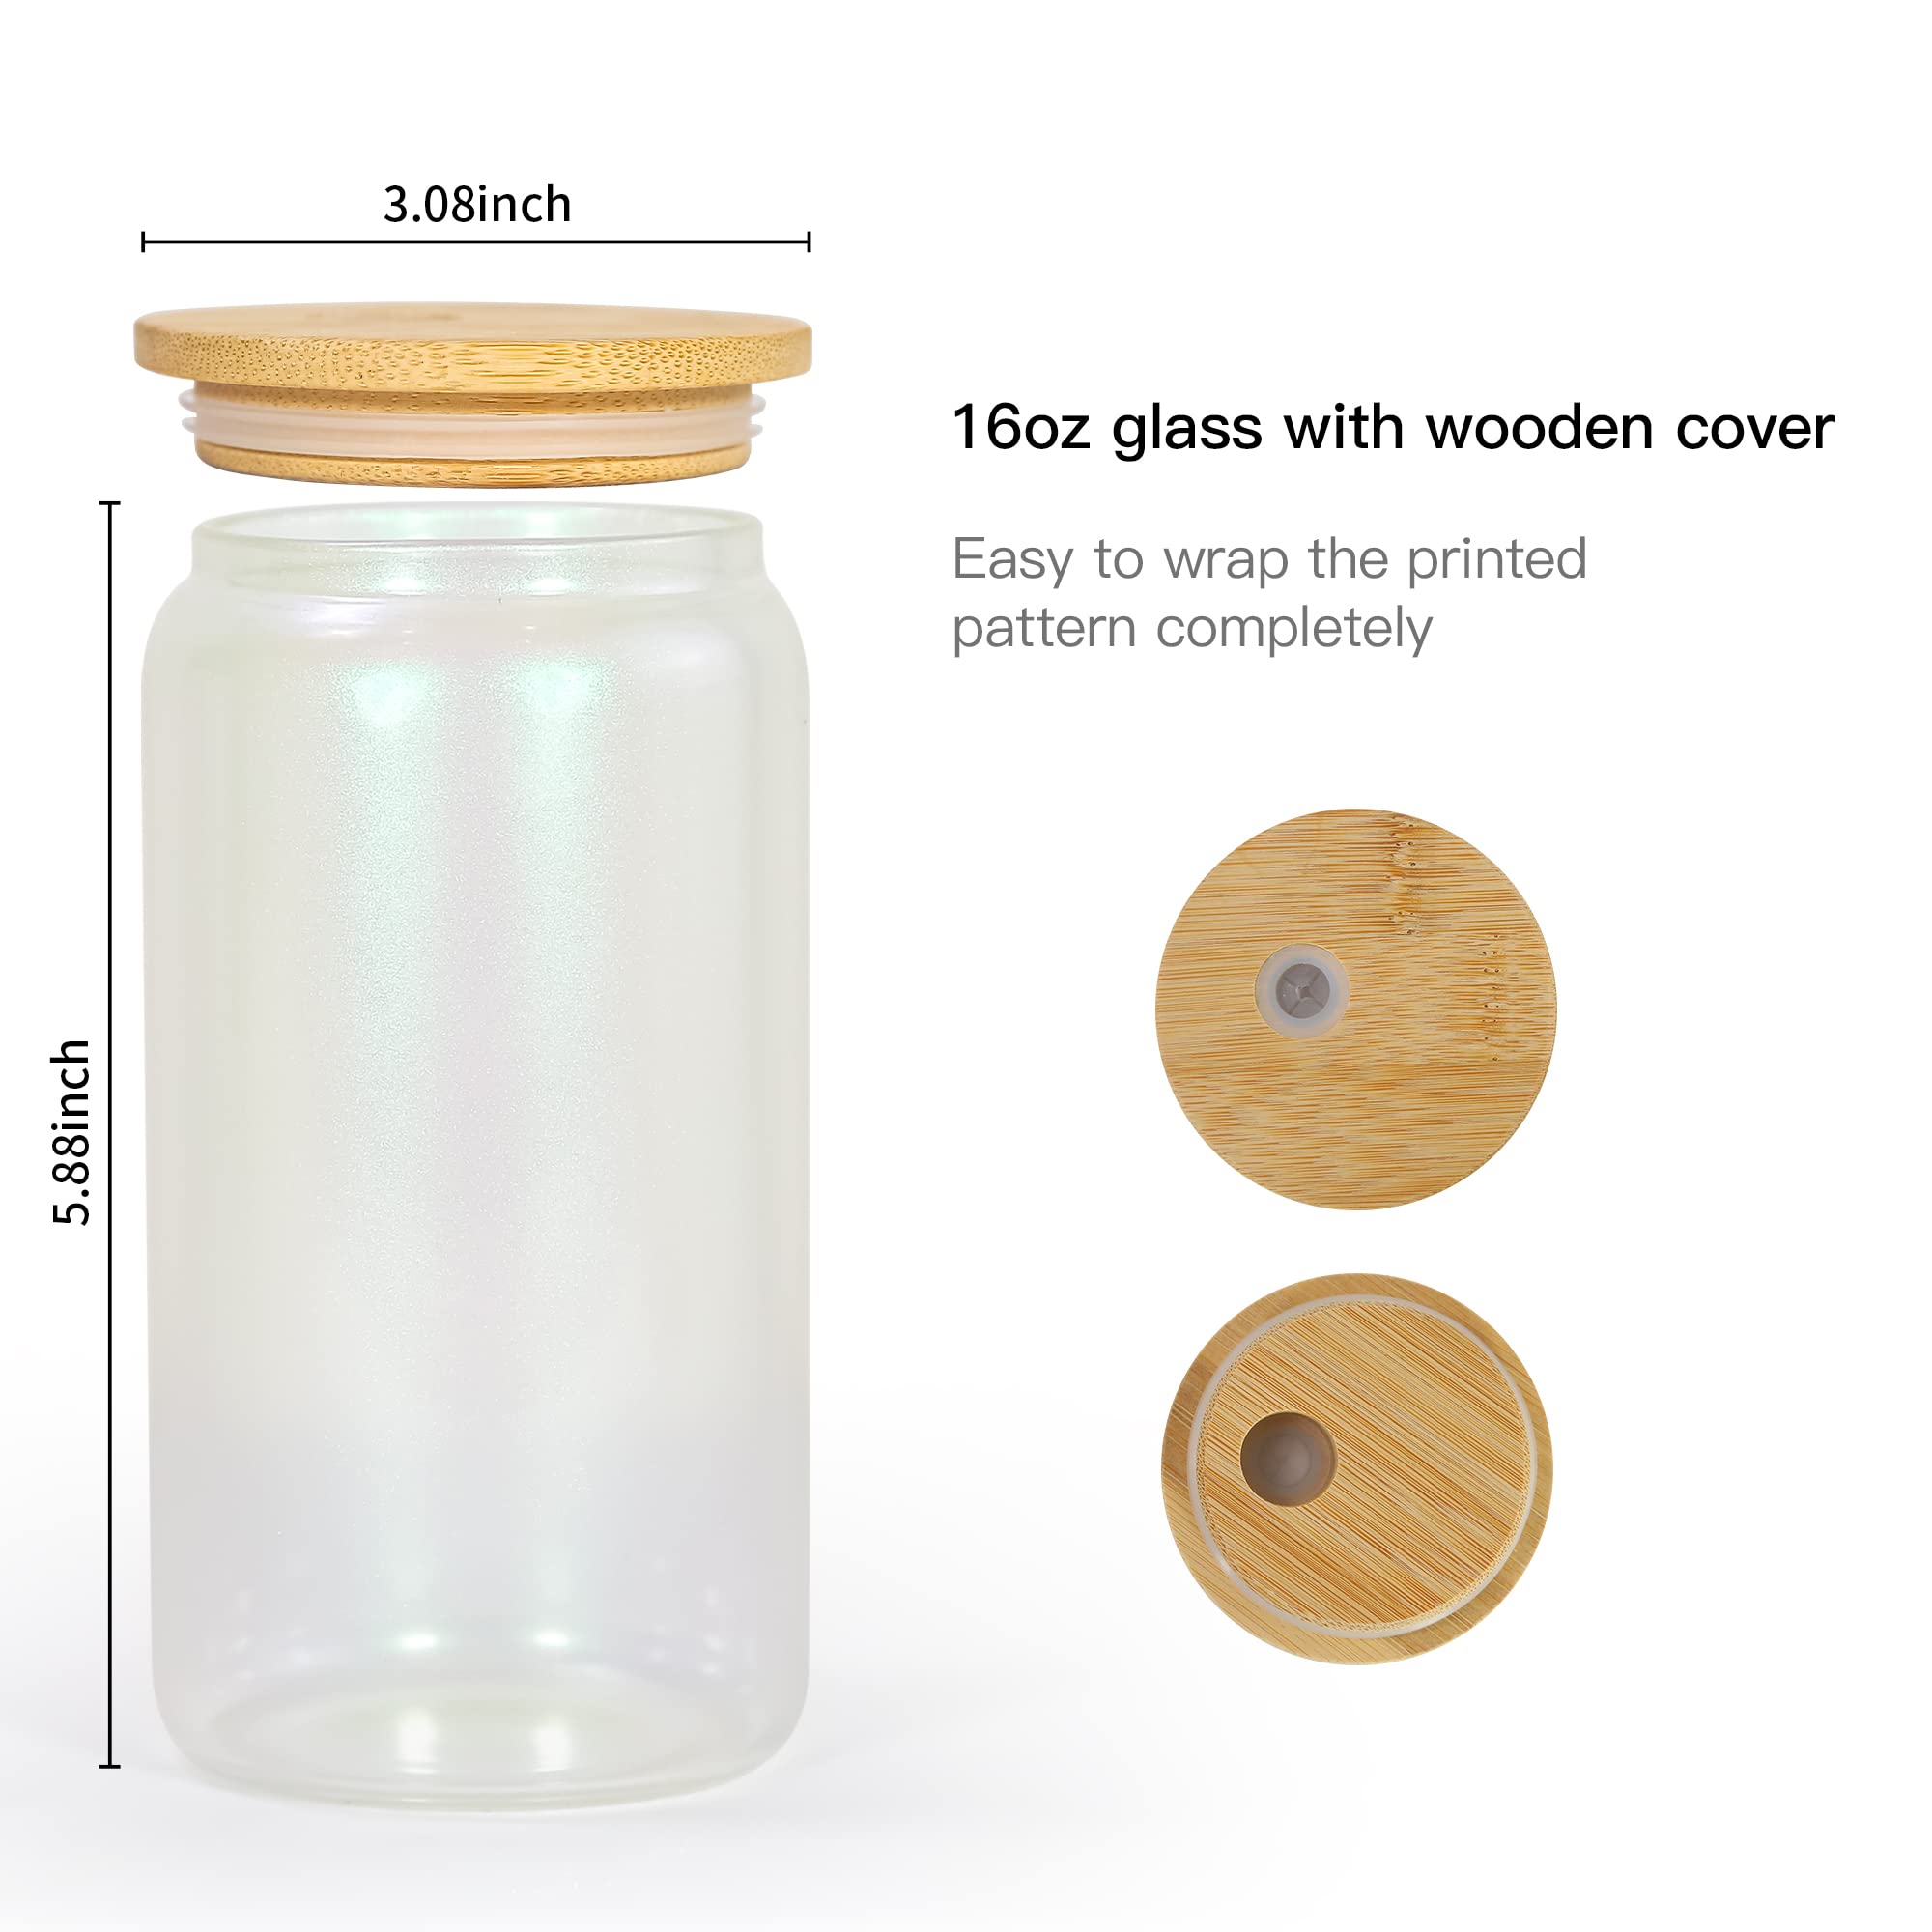 AGH 16OZ Sublimation Glass Blanks with Bamboo Lid and Plastic Straws, 12 Pack Transparent Chameleon Glasses Tumbler Mason Jar Cups for Iced Coffee, Juice, Soda, Drinks